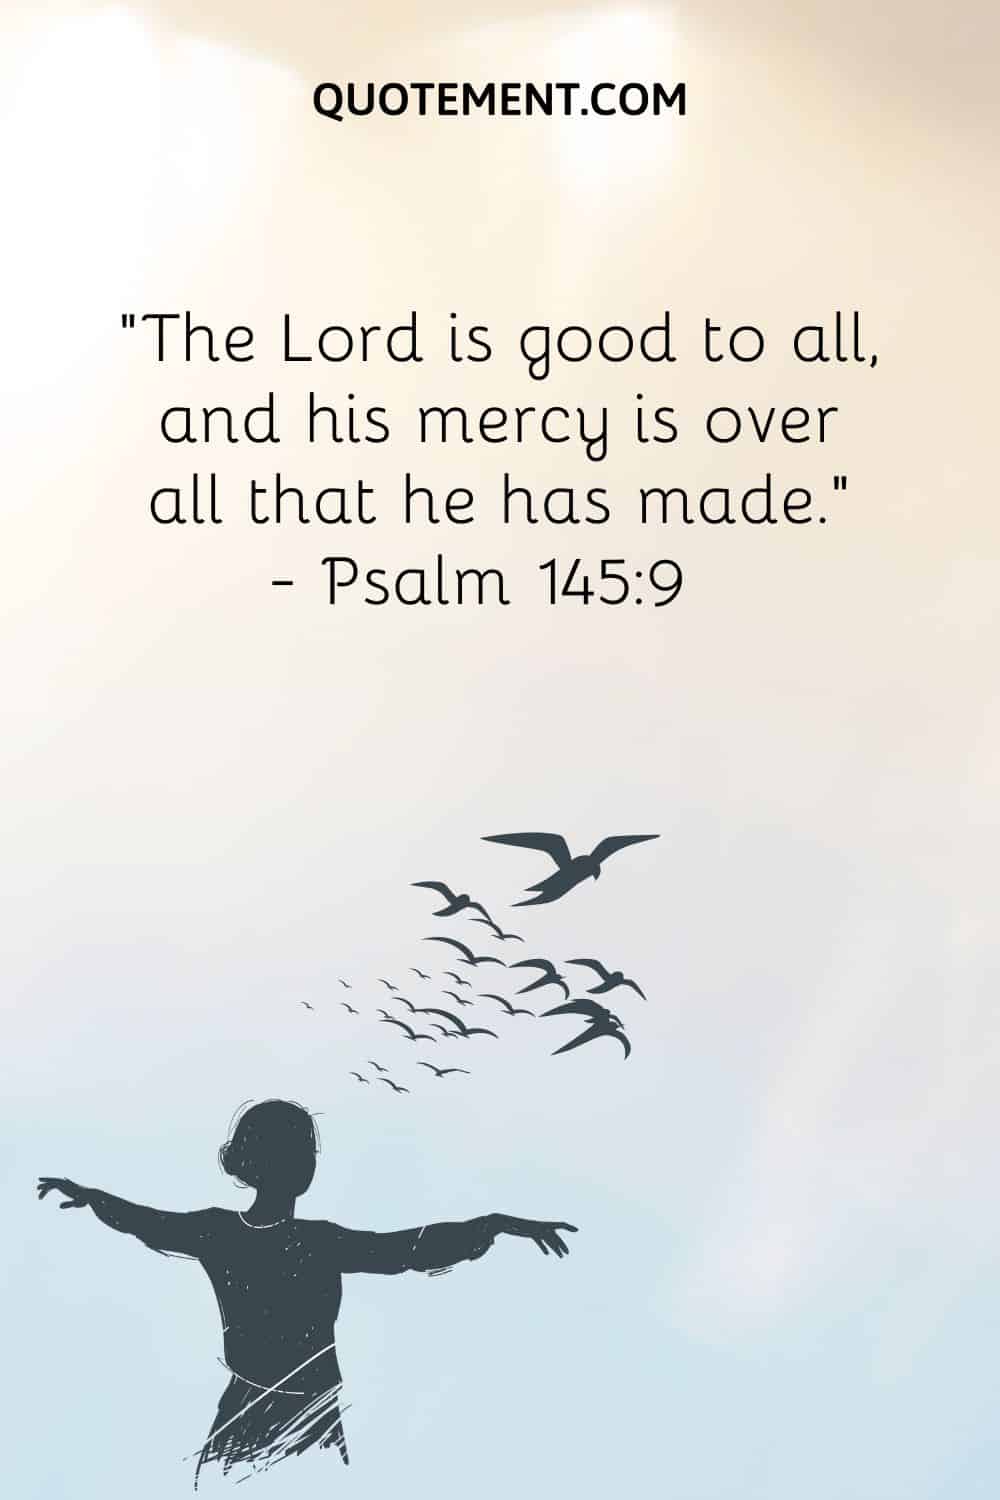 “The Lord is good to all, and his mercy is over all that he has made.” ― Psalm 1459